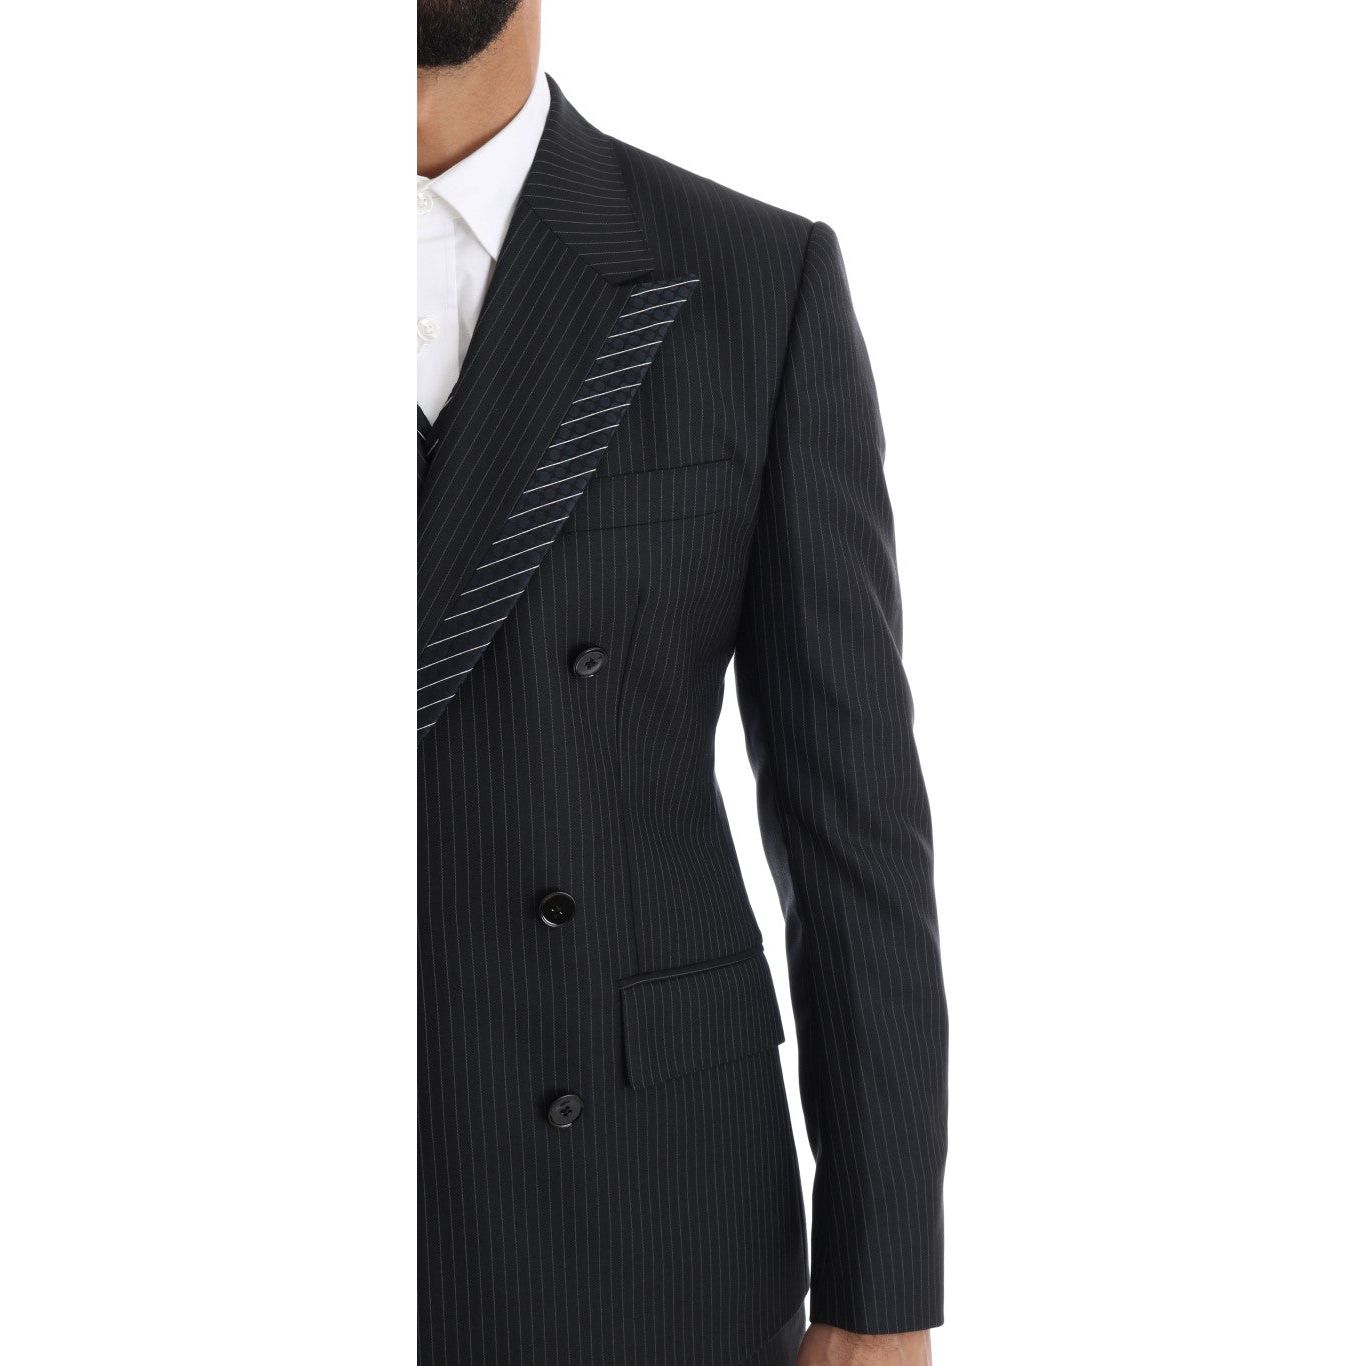 Dolce & Gabbana Elegant Gray Striped Wool Silk Men's 3-Piece Suit gray-double-breasted-3-piece-suit Suit 460447-gray-double-breasted-3-piece-suit-4.jpg